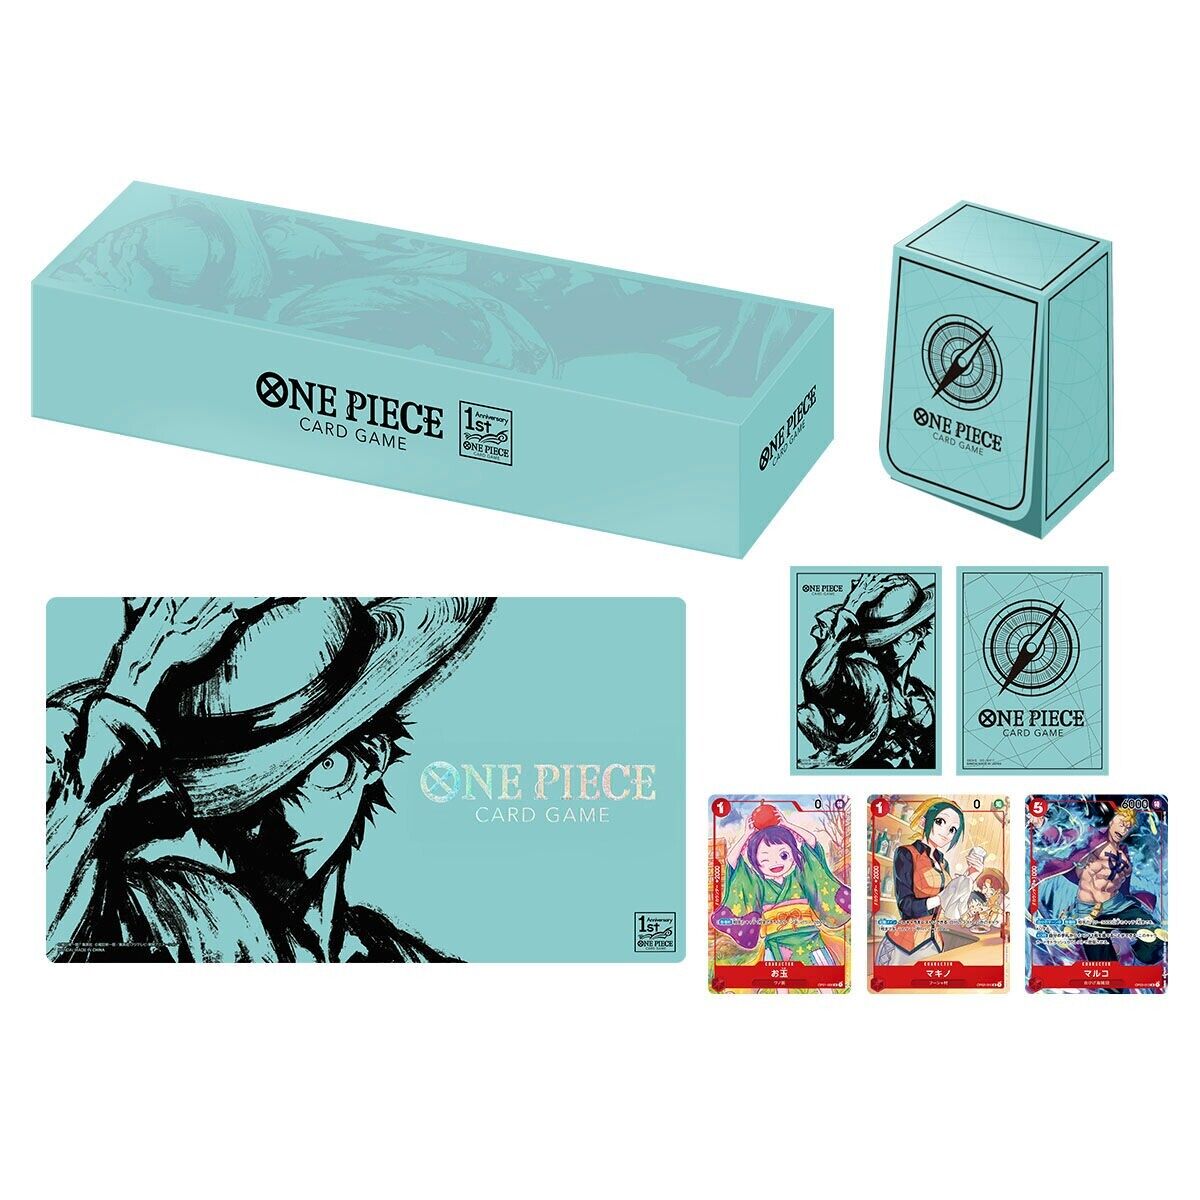 ONE PIECE Card Game 1st ANNIVERSARY Set Complete Promo Card with BOX BANDAI